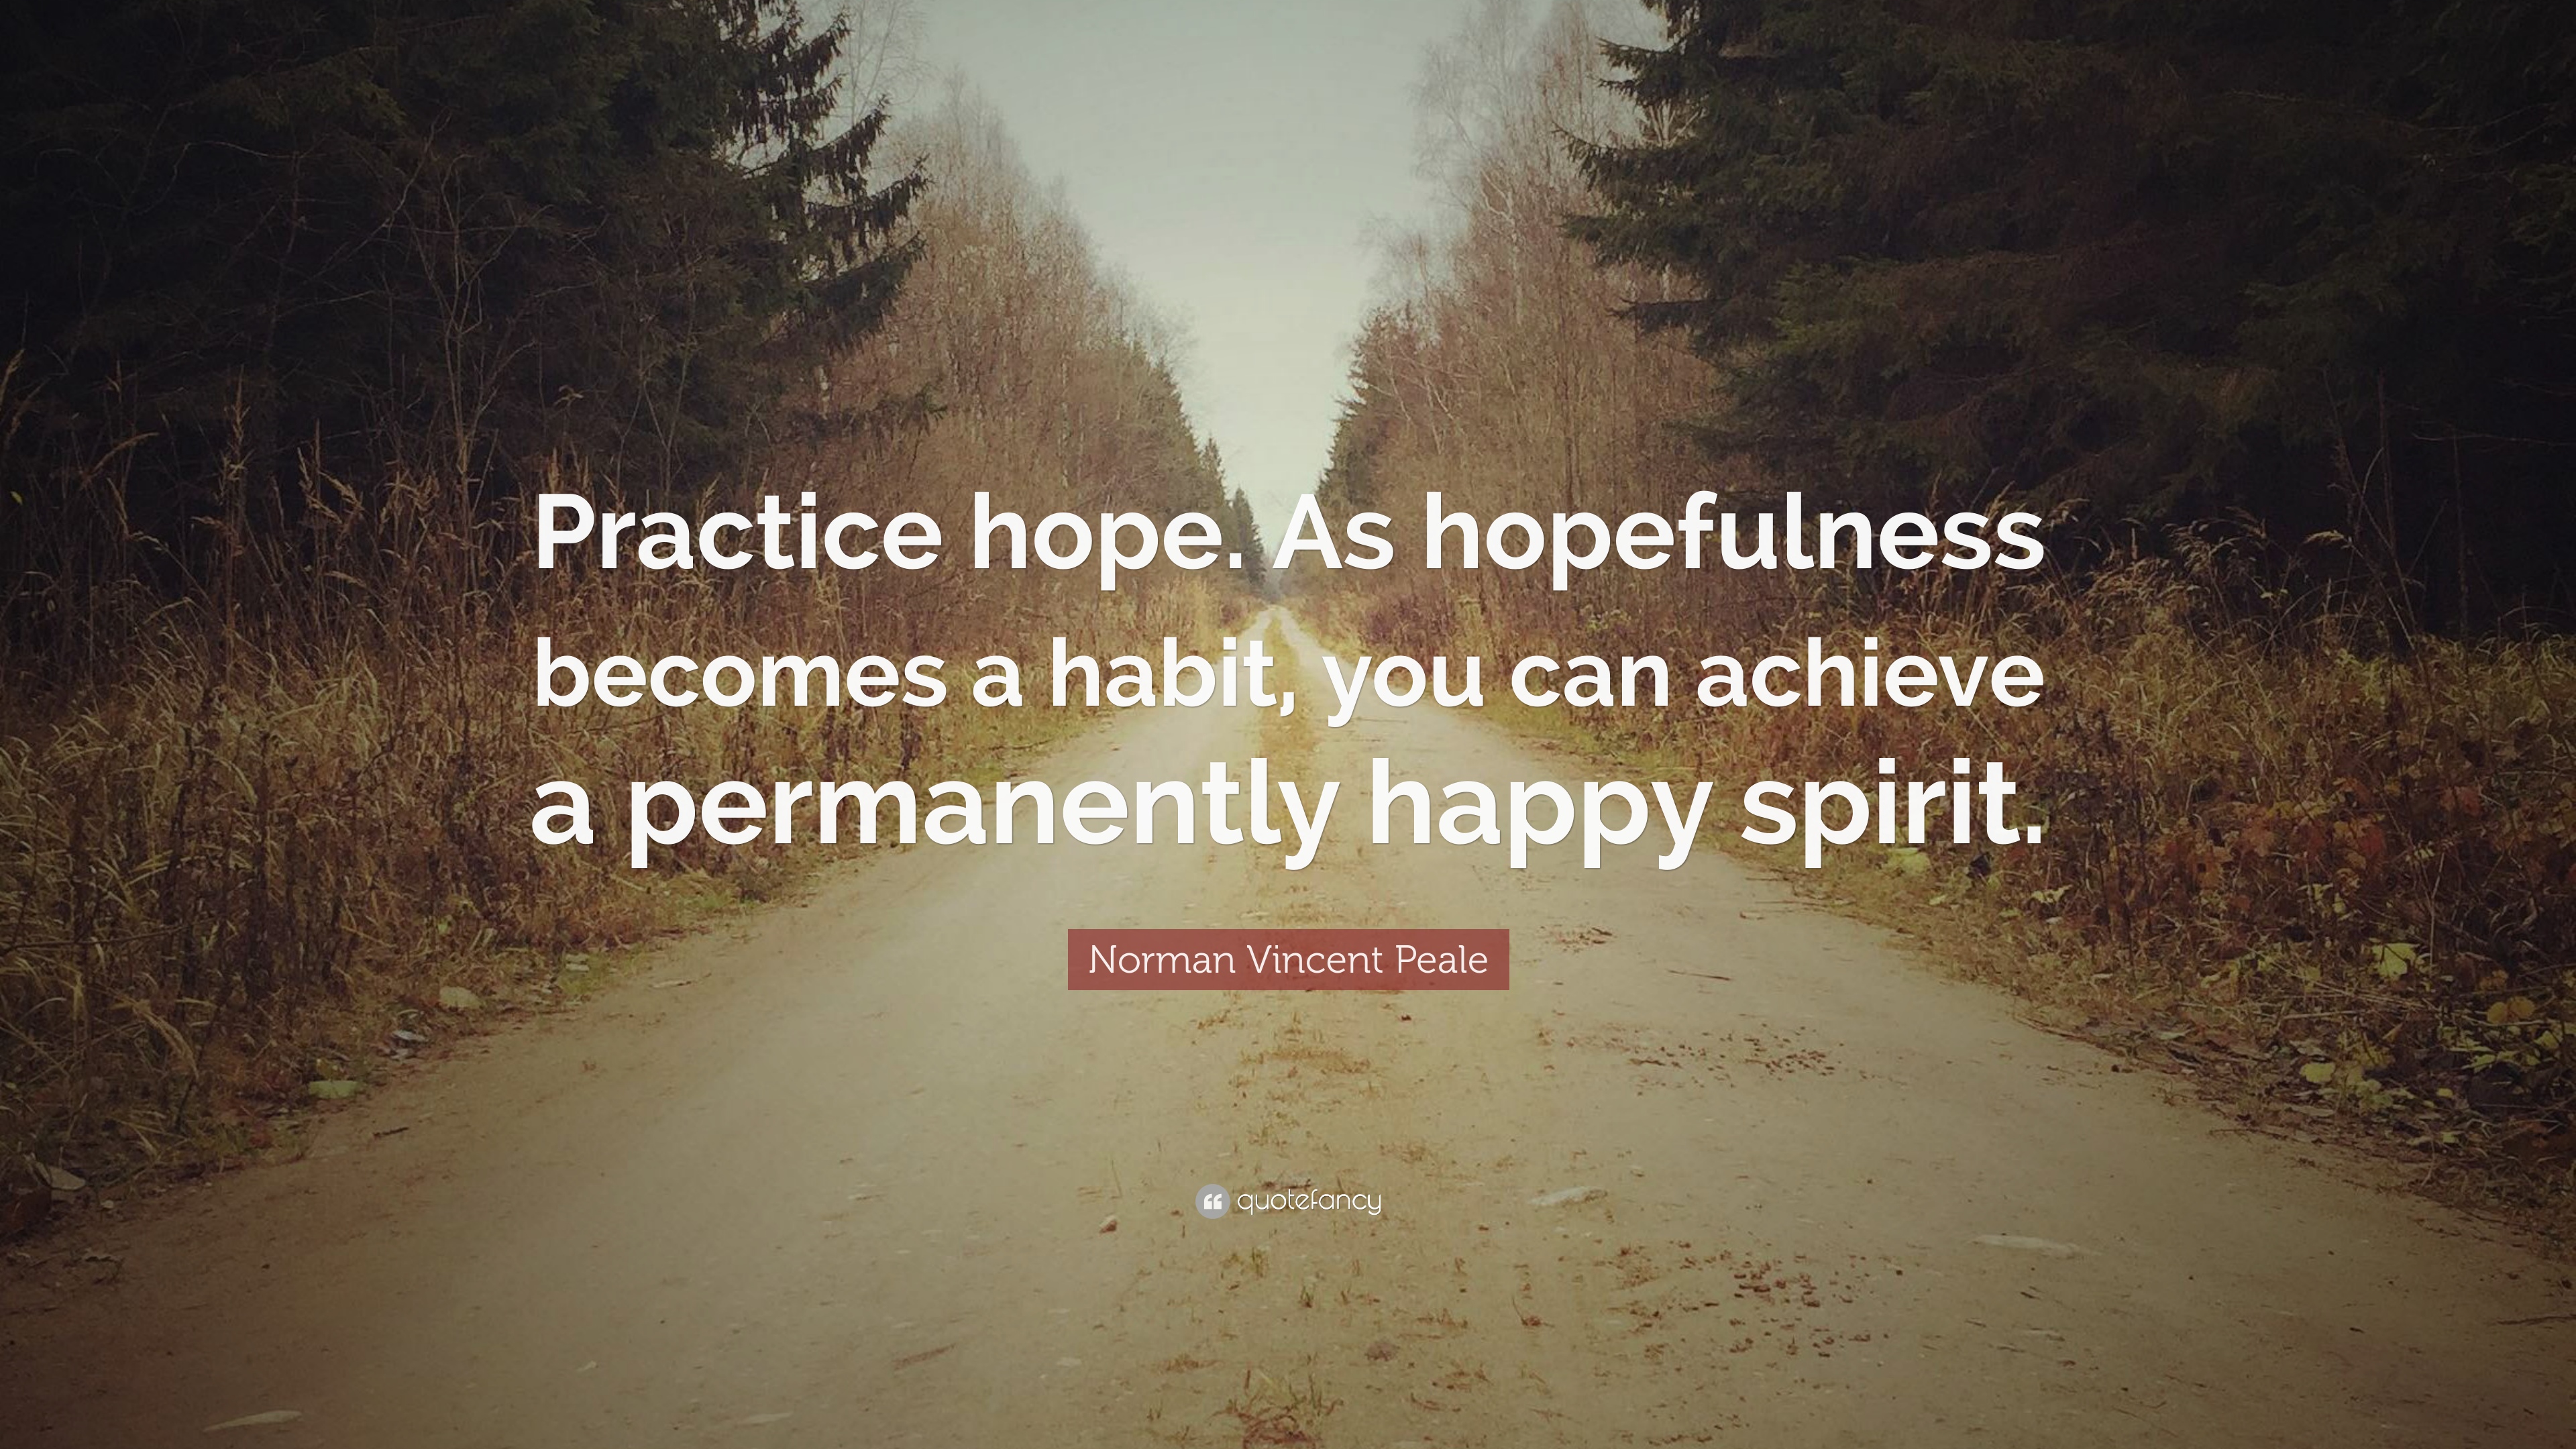 229933-norman-vincent-peale-quote-practice-hope-as-hopefulness-becomes-a